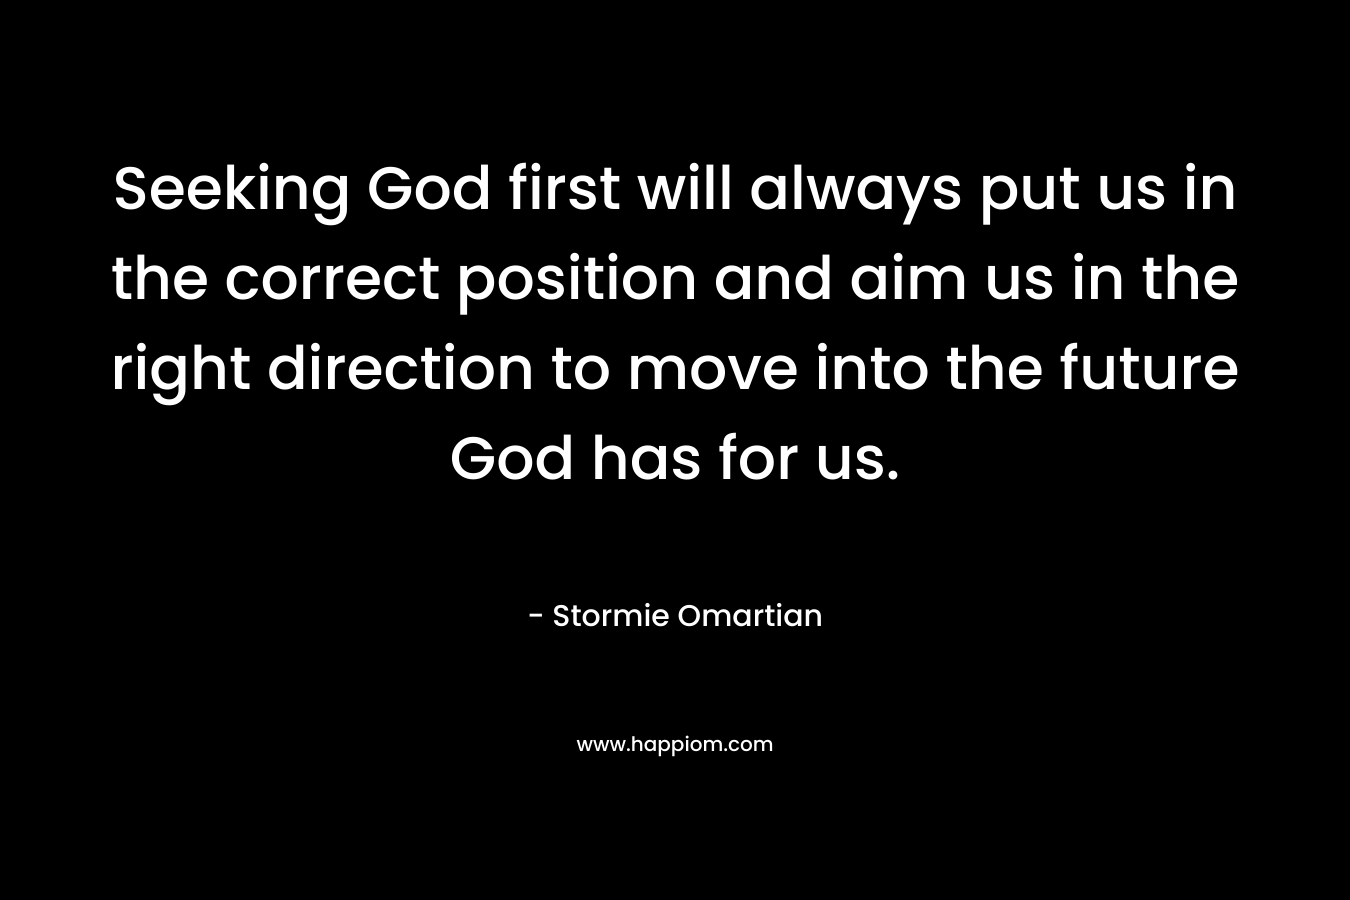 Seeking God first will always put us in the correct position and aim us in the right direction to move into the future God has for us. – Stormie Omartian